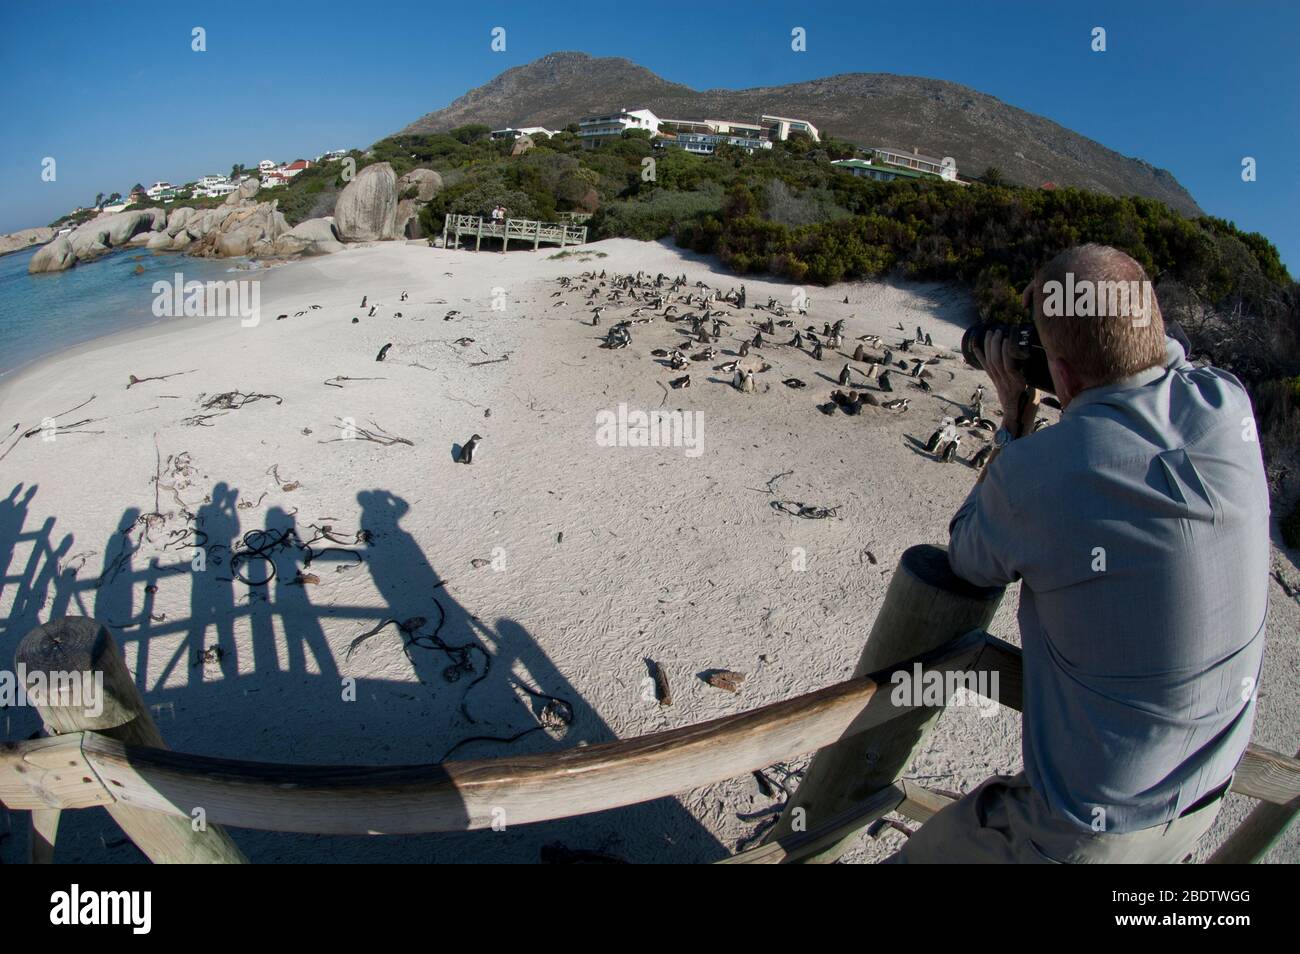 African Penguins, Spheniscus demersus, rookery on beach from viewing platform with shadows and houses in background with man taking pictures, Boulders Stock Photo